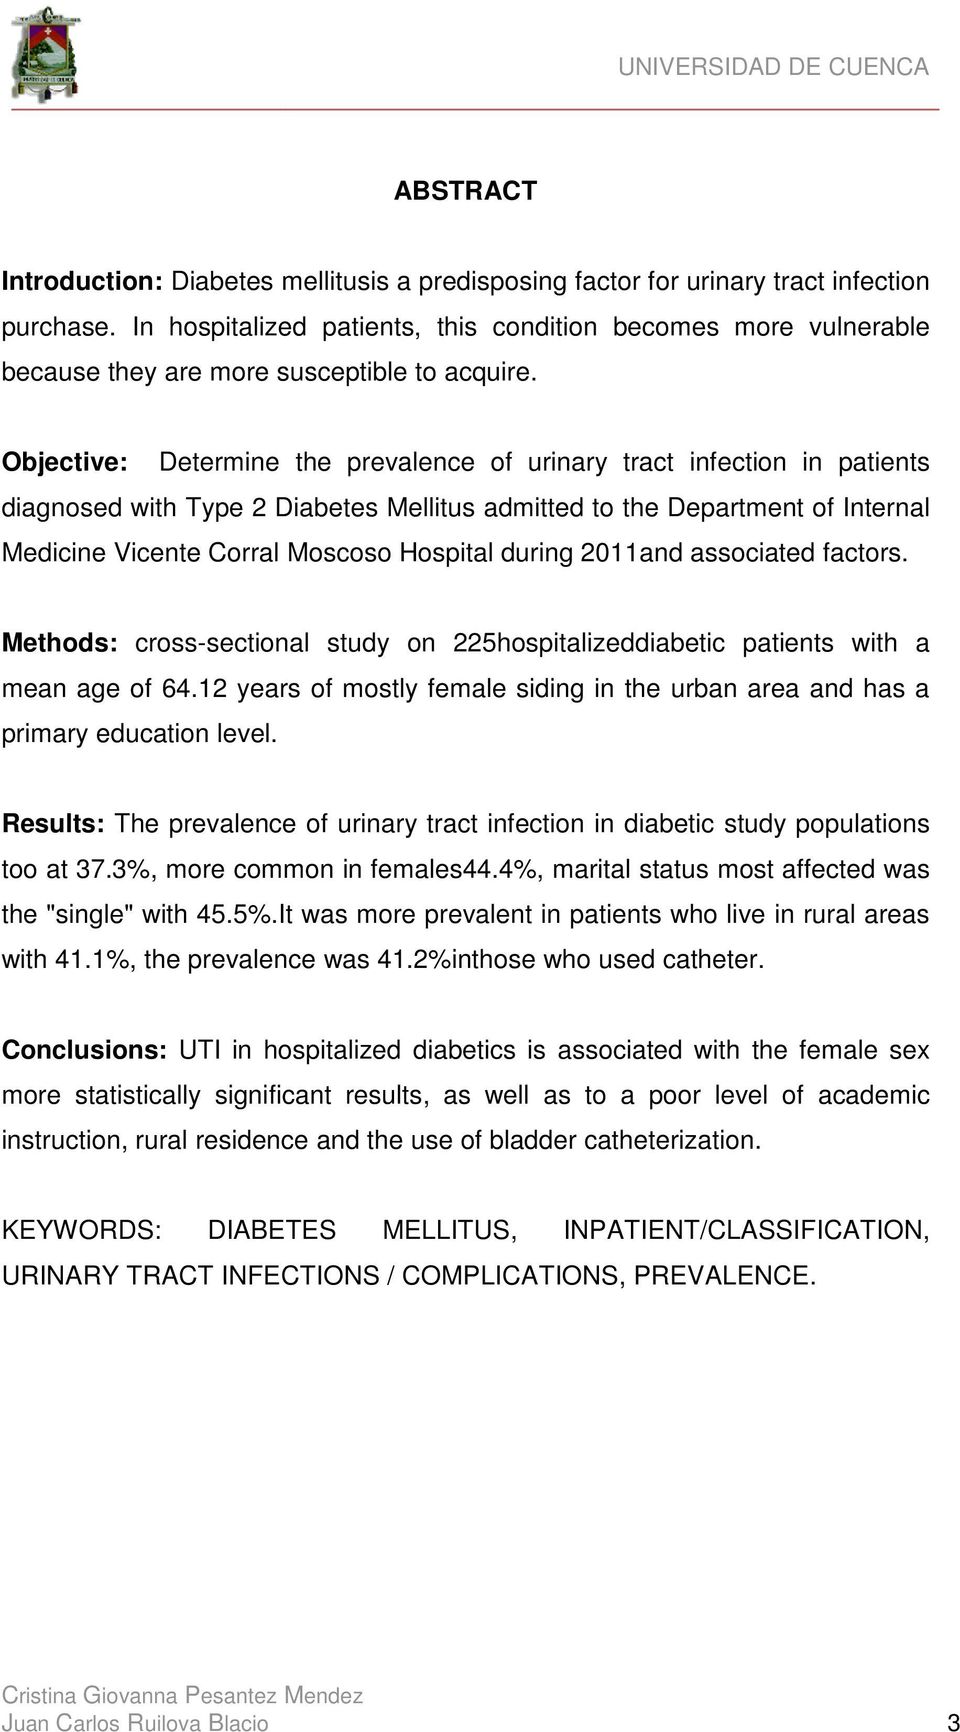 Objective: Determine the prevalence of urinary tract infection in patients diagnosed with Type 2 Diabetes Mellitus admitted to the Department of Internal Medicine Vicente Corral Moscoso Hospital